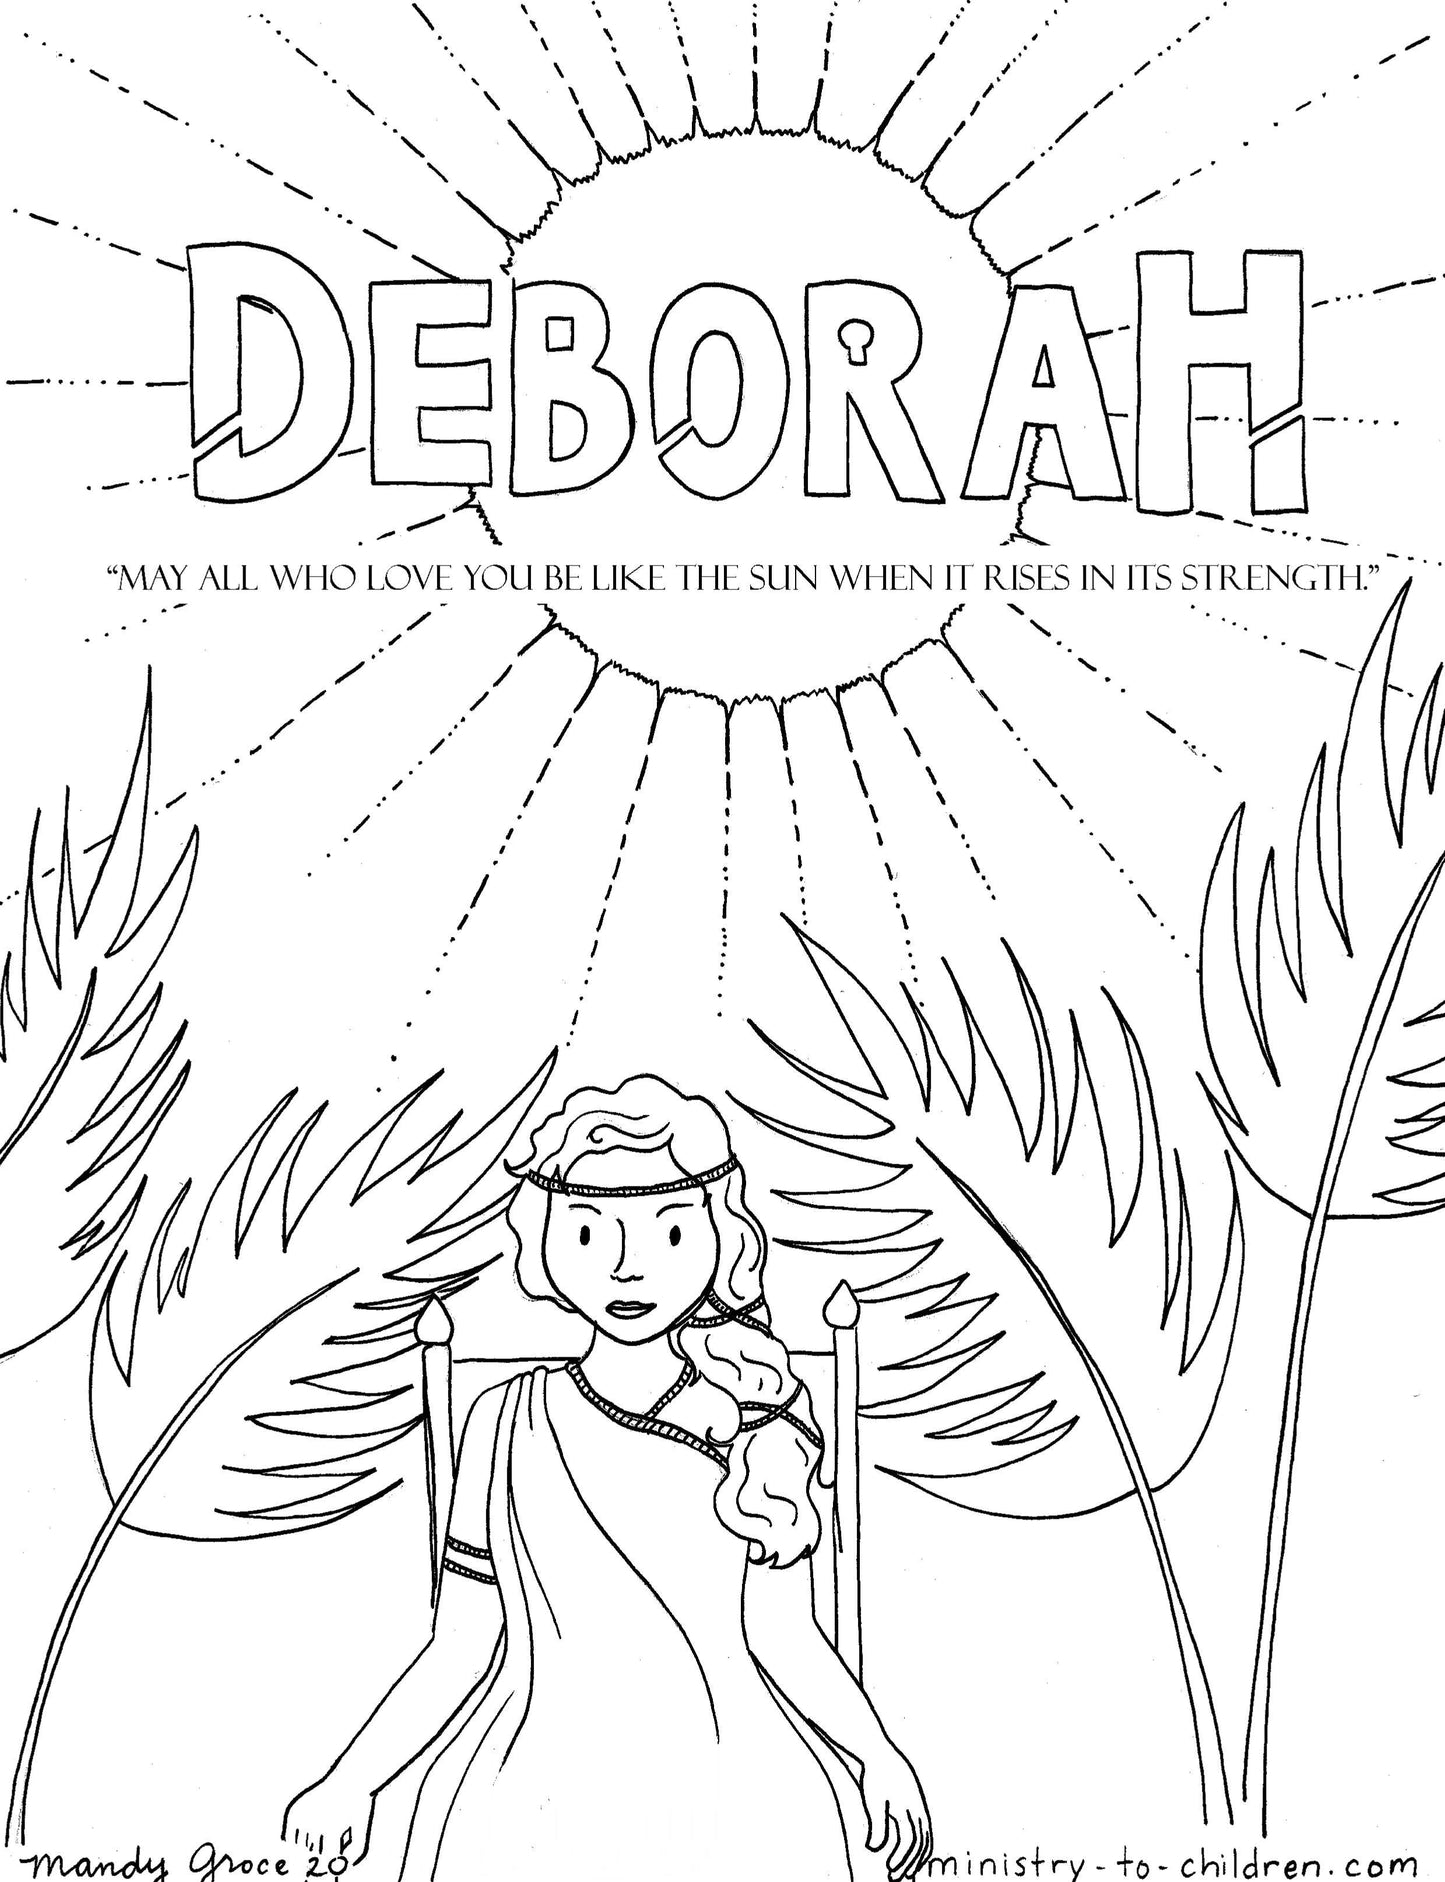 Bible Heroes Coloring Book (Free 11-Page Download) - Sunday School Store 